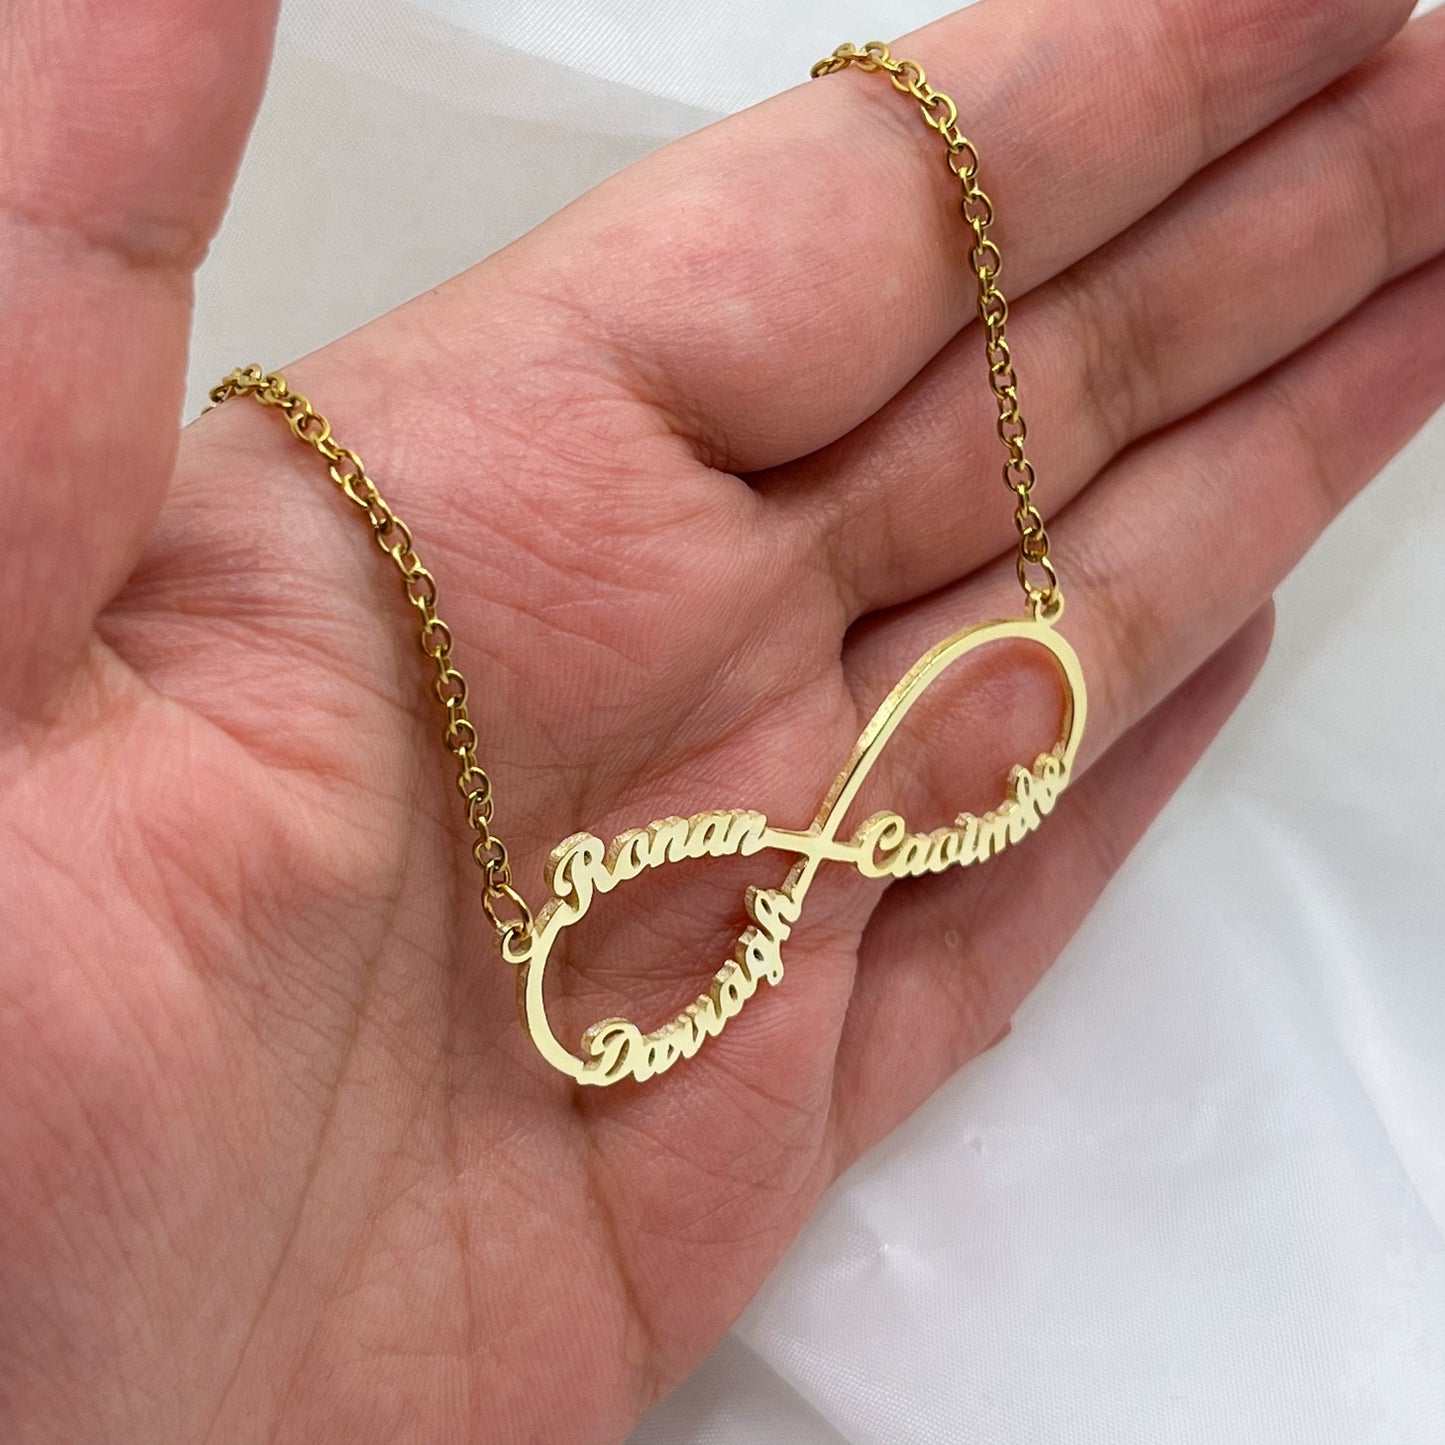 4 Names Infinity Necklace-Explore our Unique 4 Names Infinity Necklace, a perfect blend of style and sentiment. Personalize it to cherish the names that mean the world to you. Shop Now!✔-Dazzledvenus